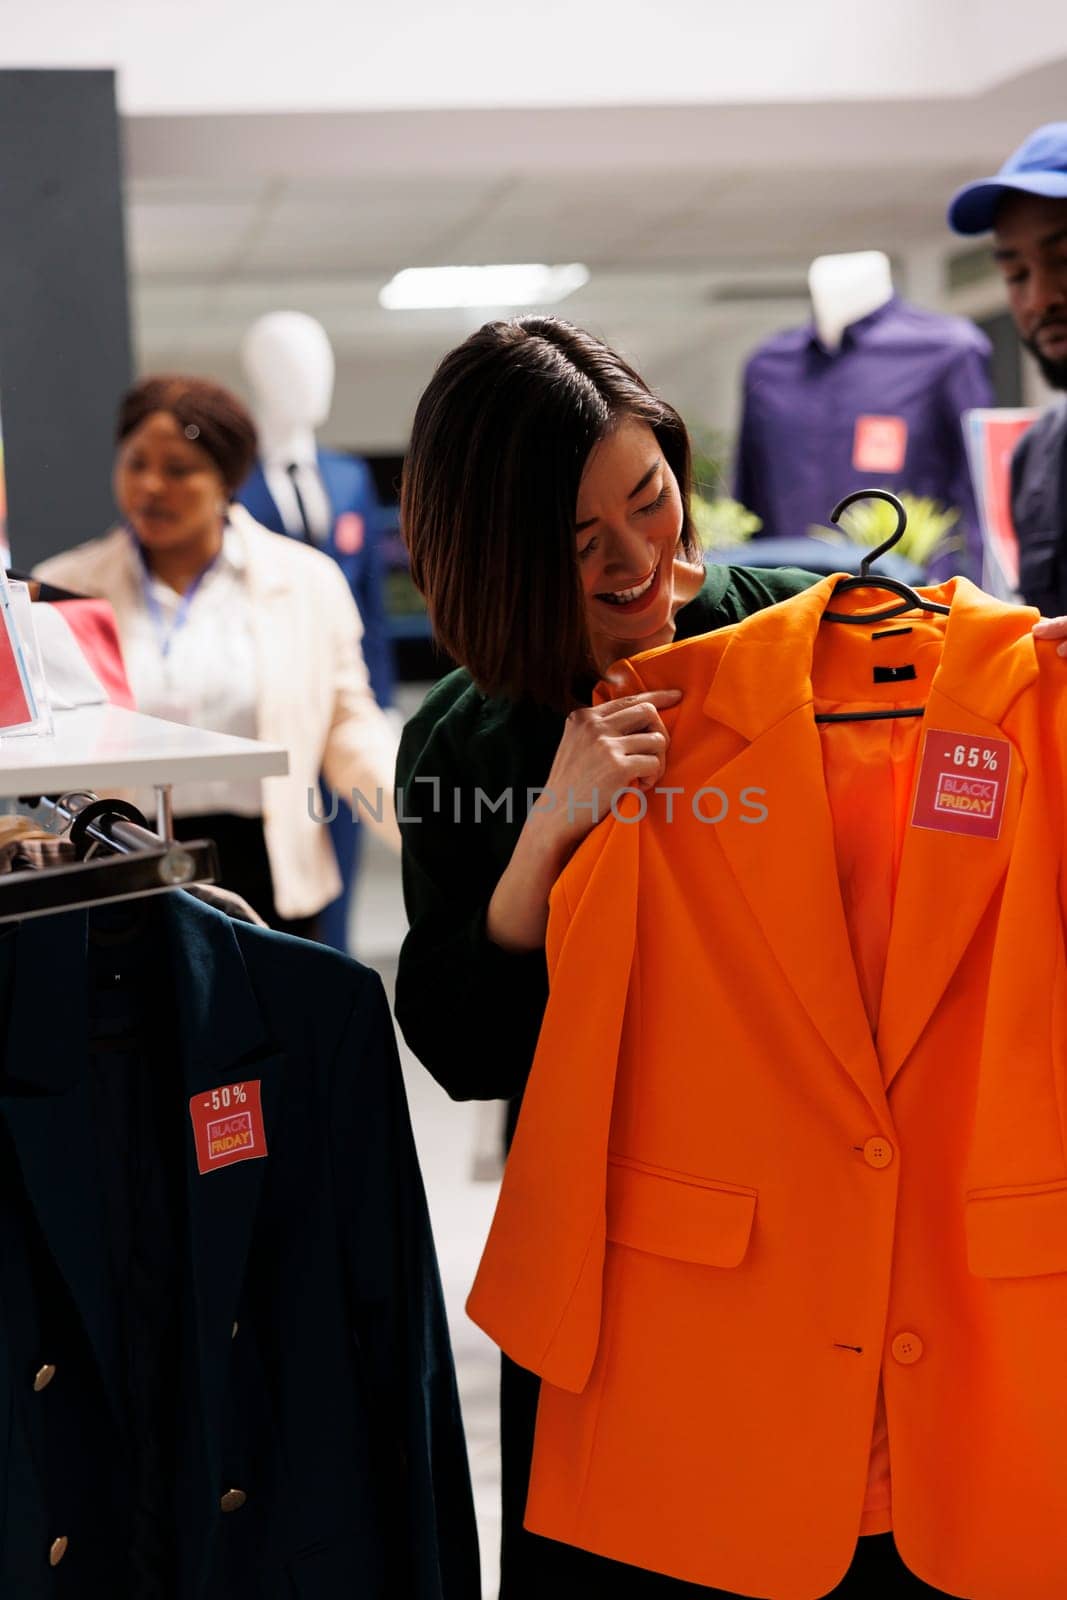 Satisfied Asian woman shopper trying on classic orange jacket with red price tag while shopping on Black Friday in clothing store. Smiling girl customer feeling happy while buying clothes on sale